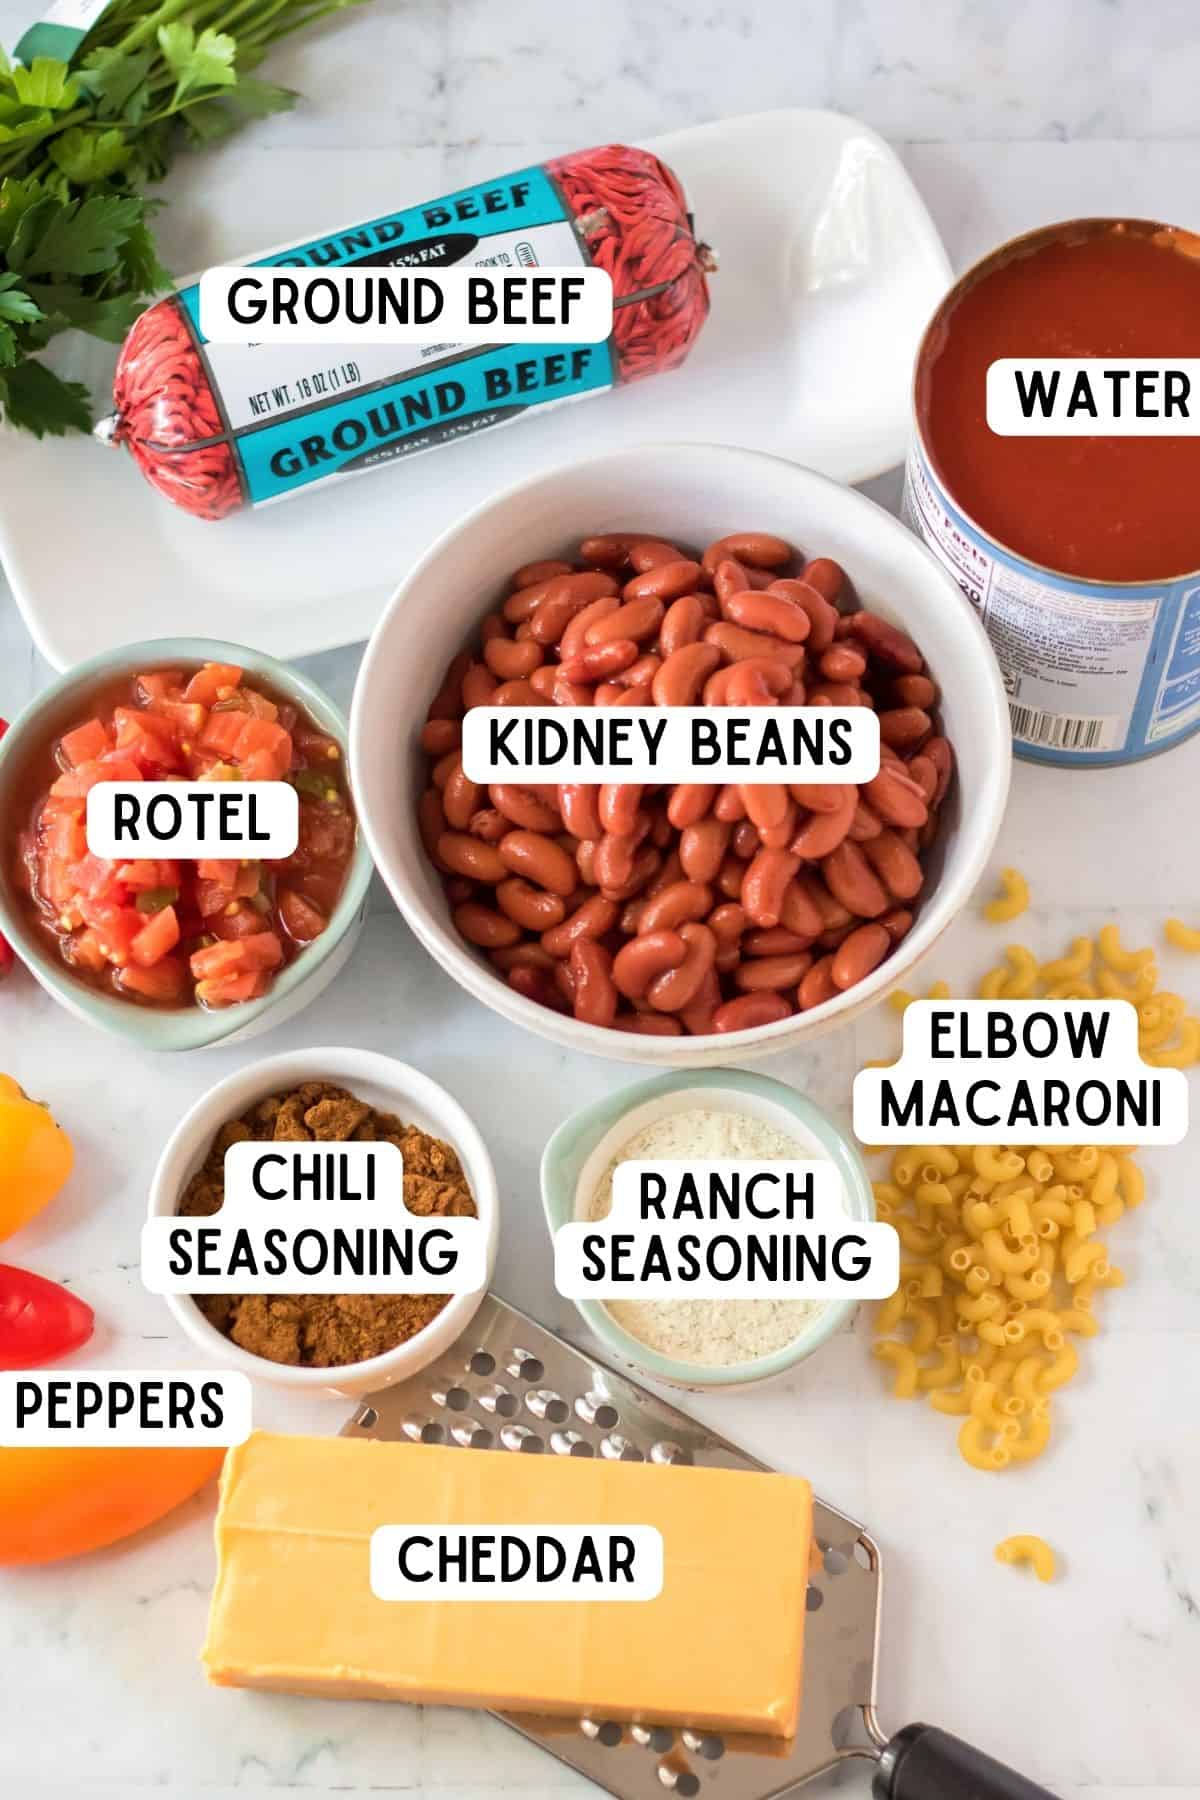 Ingredients for Chili Mac: kidney beans, ground beef, rotel, chili seasoning, ranch seasoning, elbow macaroni, bell peppers, water, and a black of cheddar cheese.